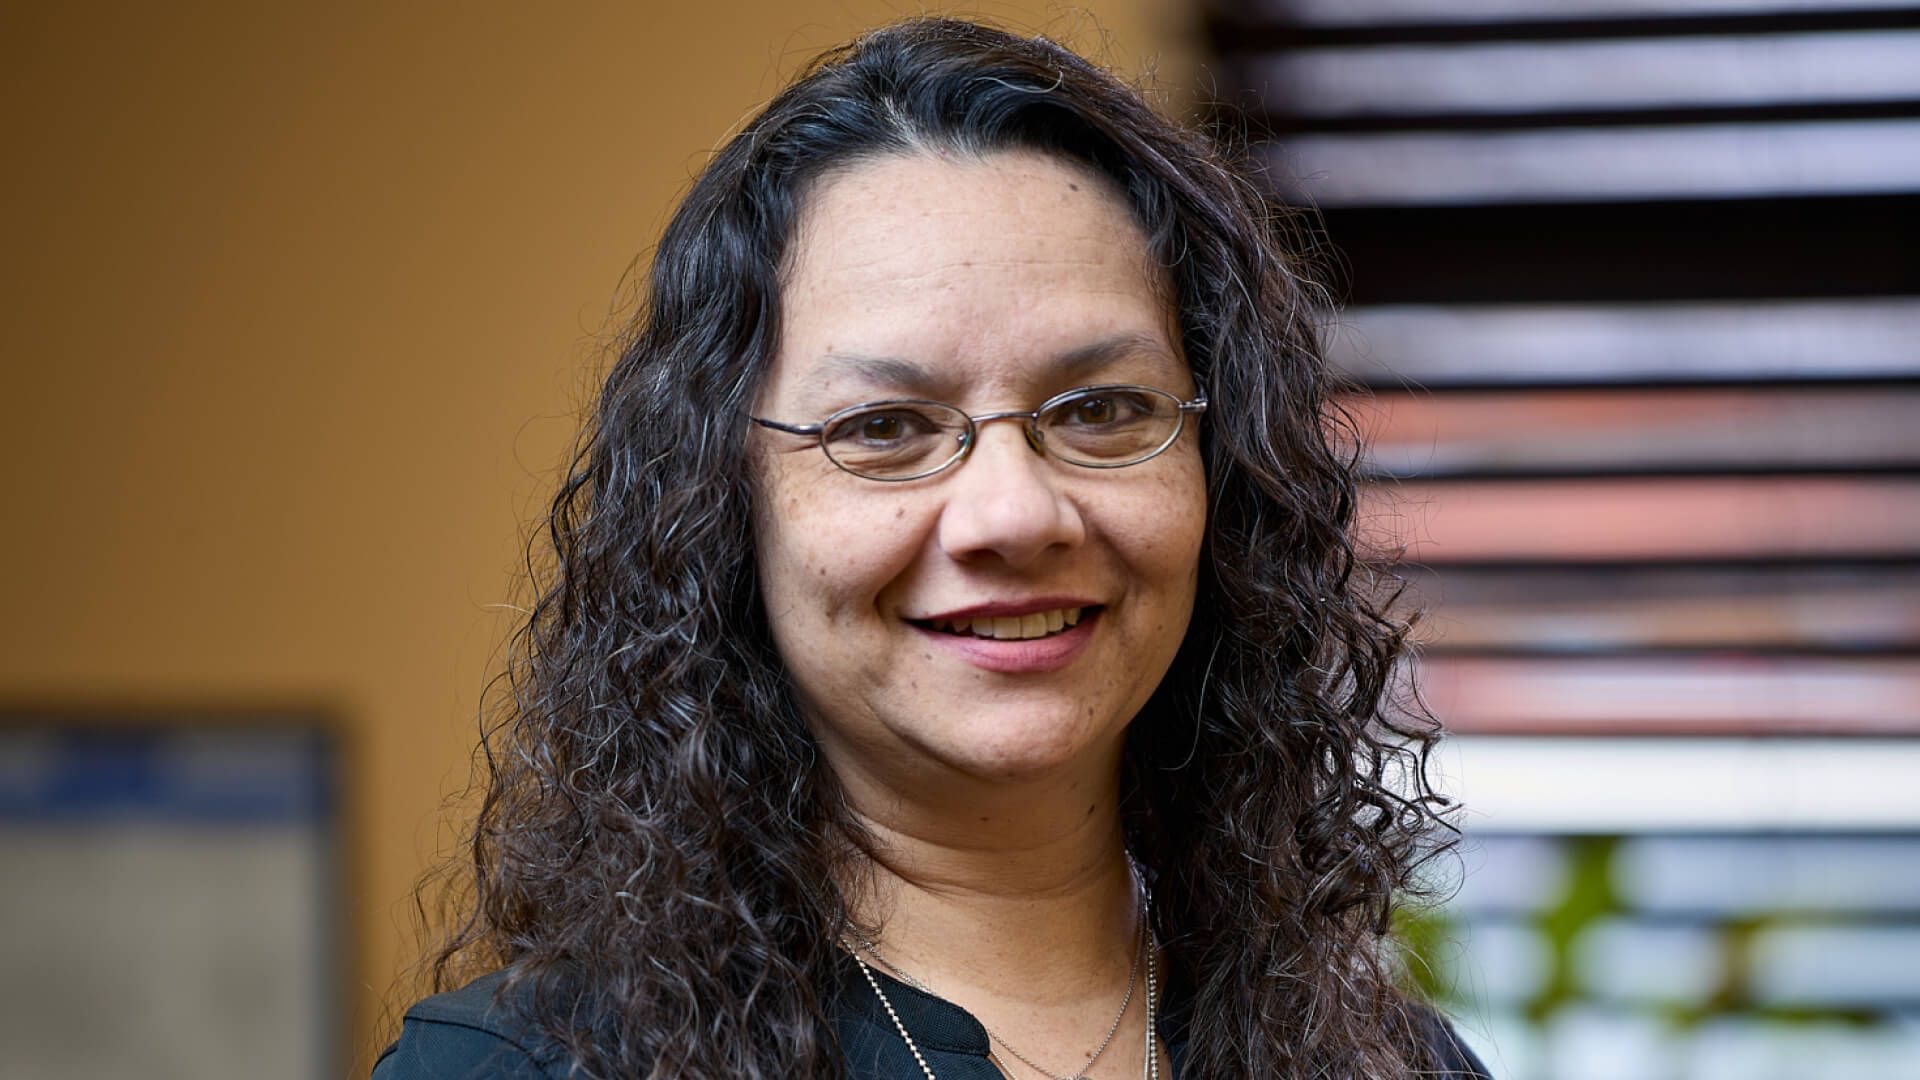 a woman with curly hair and glasses is smiling for the camera .